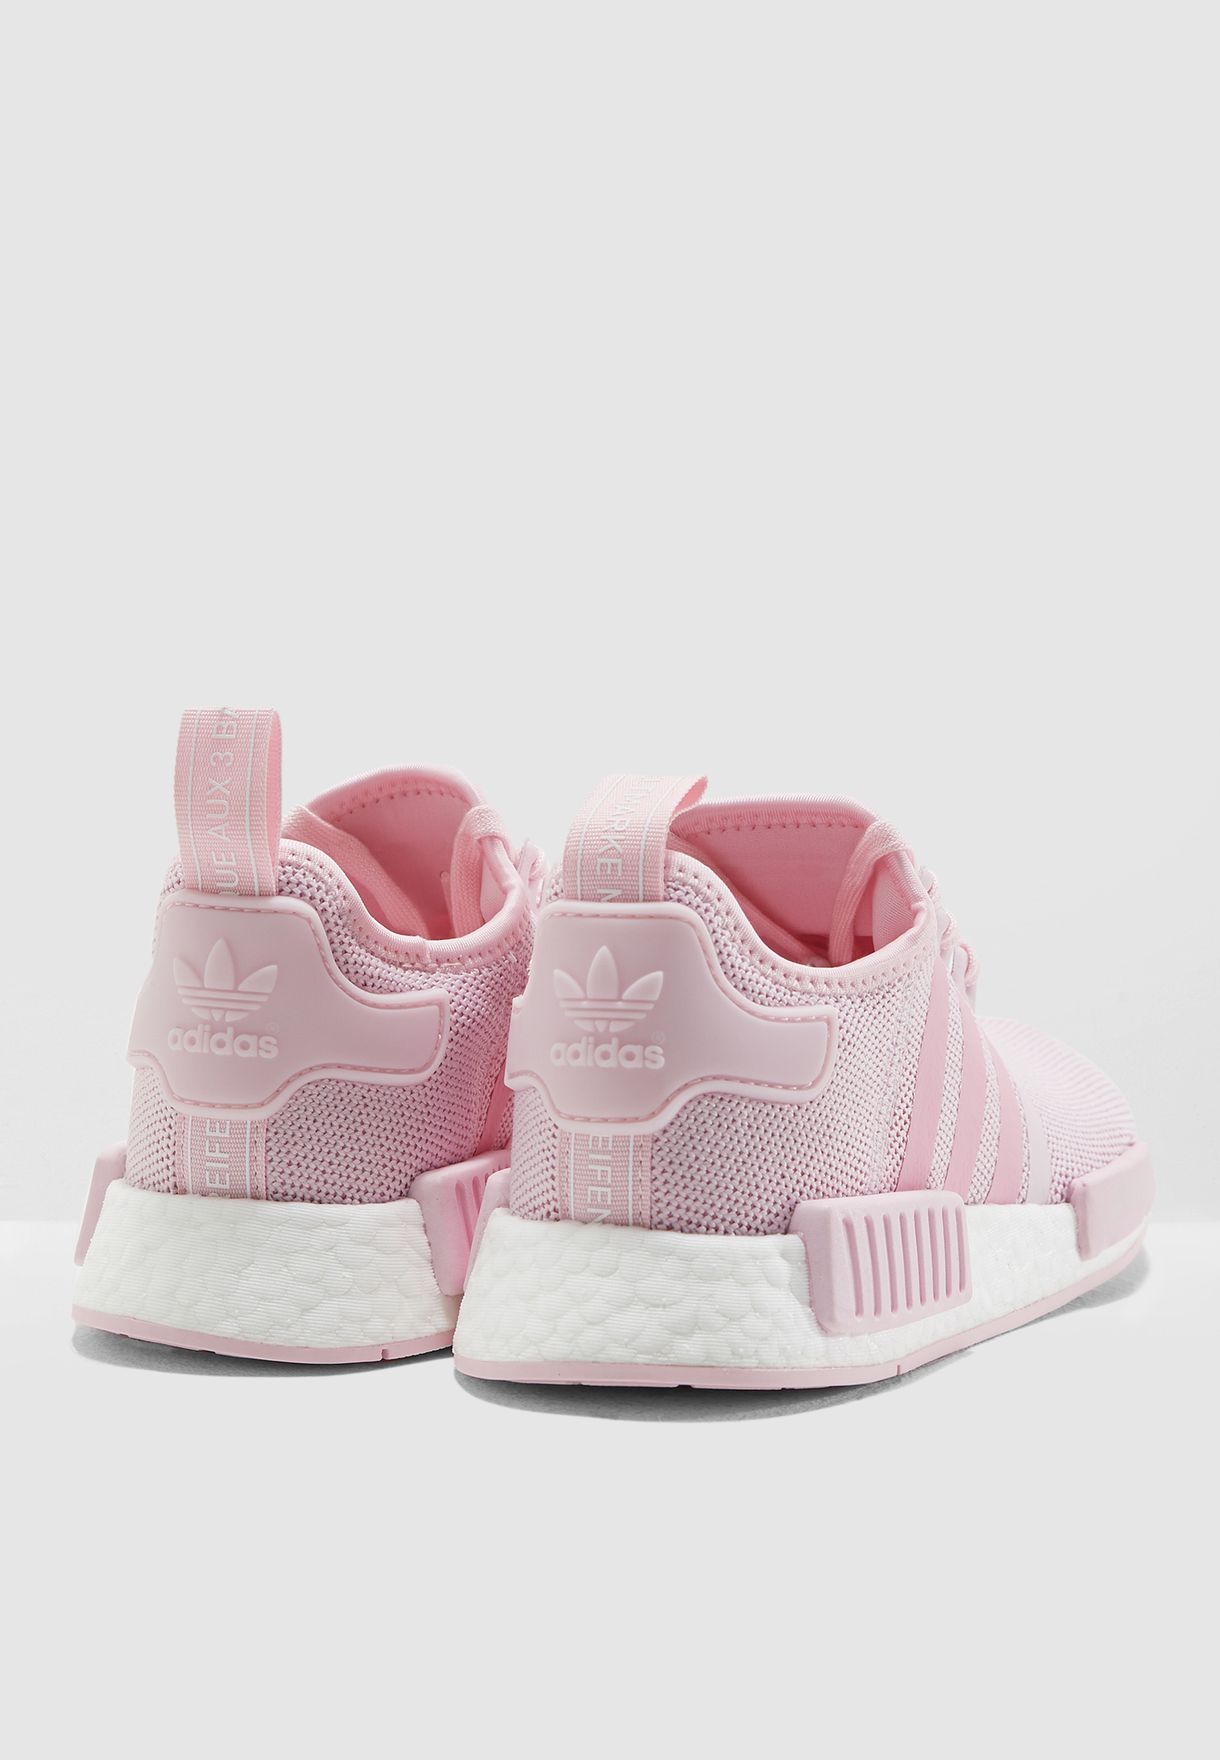 Adidas NMD R1 J G27687 Pink White Youth 